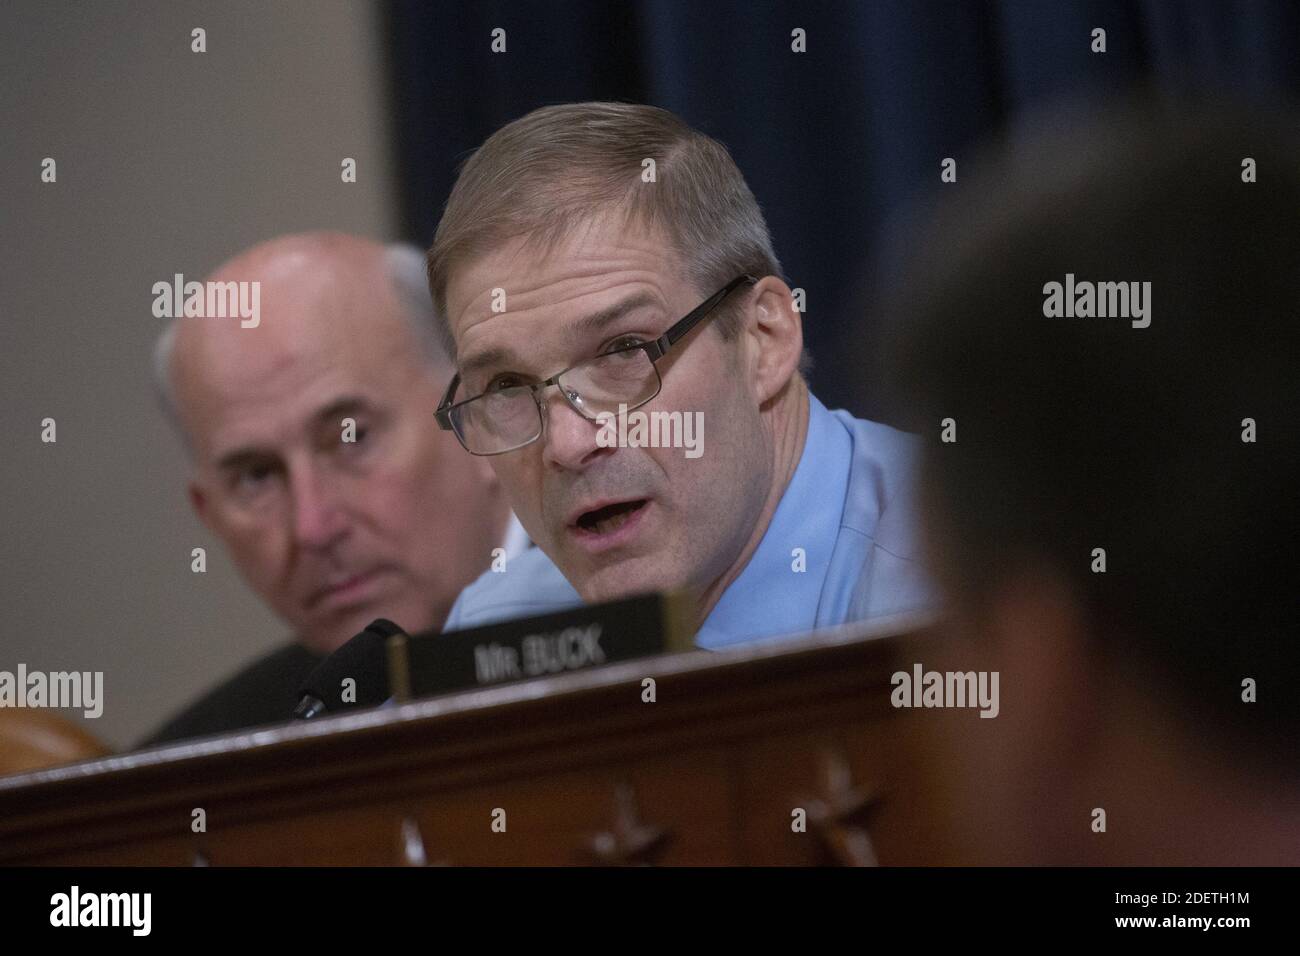 United States Representative Jim Jordan (Republican of Ohio) speaks during the United States House Committee on the Judiciary hearing with constitutional law experts Noah Feldman, of Harvard University, Pamela Karlan, of Stanford University, Michael Gerhardt, of the University of North Carolina, and Jonathan Turley of The George Washington University Law School on Capitol Hill in Washington, DC, USA on Wednesday, December 4, 2019. Photo by Stefani Reynolds/CNP/ABACAPRESS.COM Stock Photo